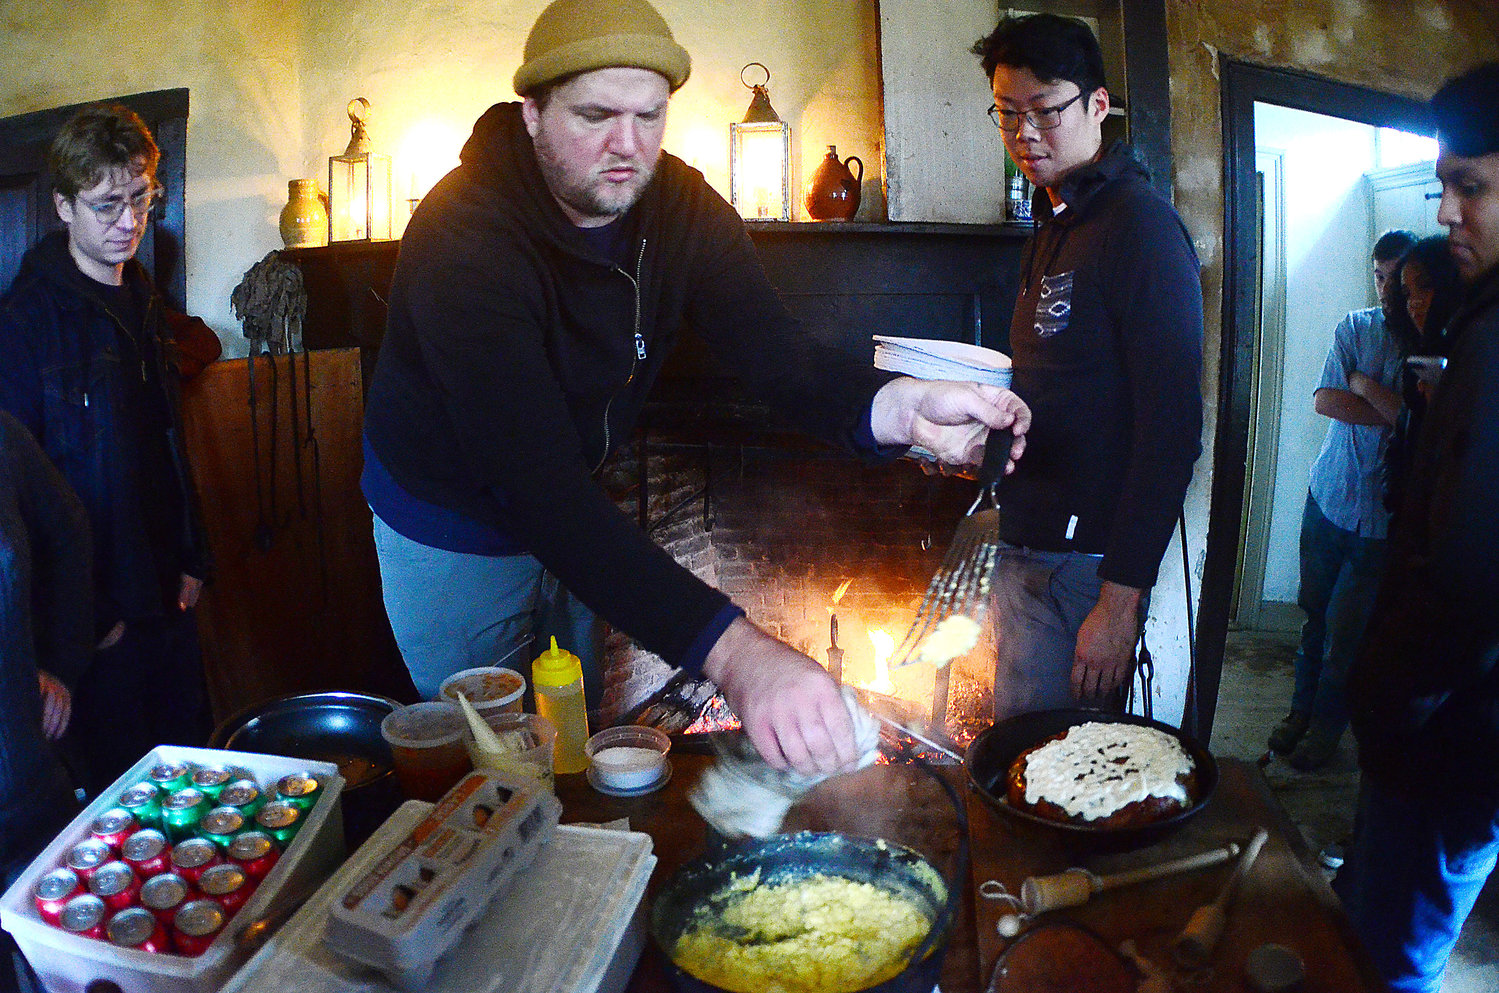 Restaurant owner Ben Sukle (middle) and John Ho (right) cook a meal on an historic open hearth for his Birch and Oberlin employees at Coggeshall Farm on Tuesday.